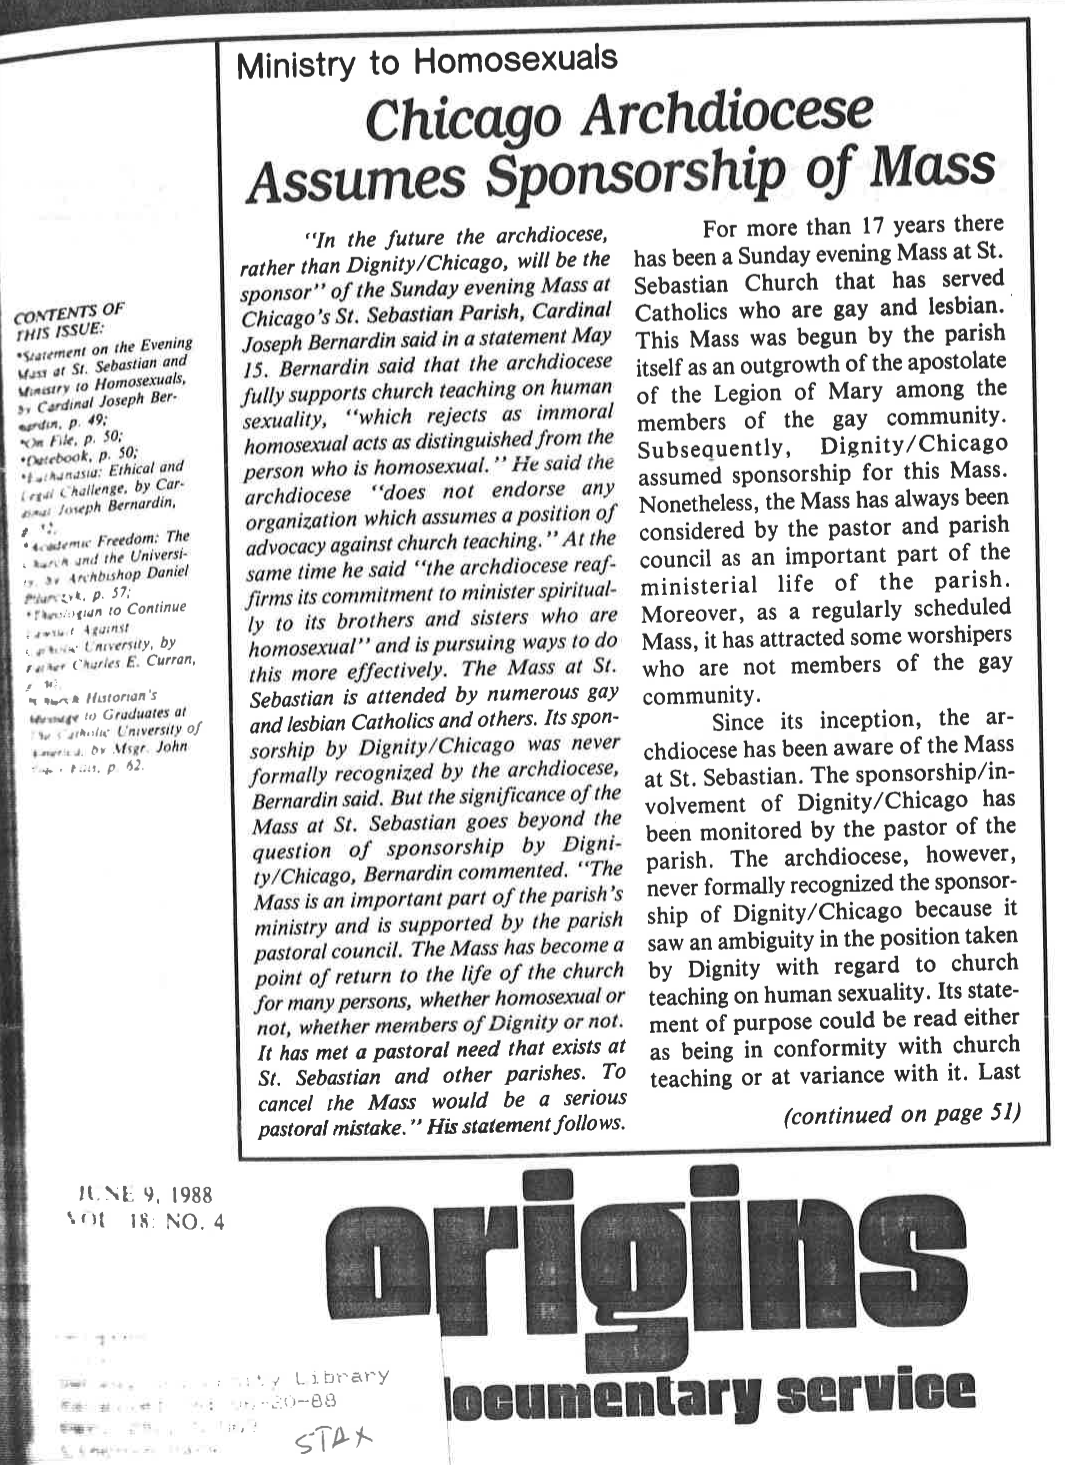 Coverage of Dignity and Arch 1988 p1.jpg